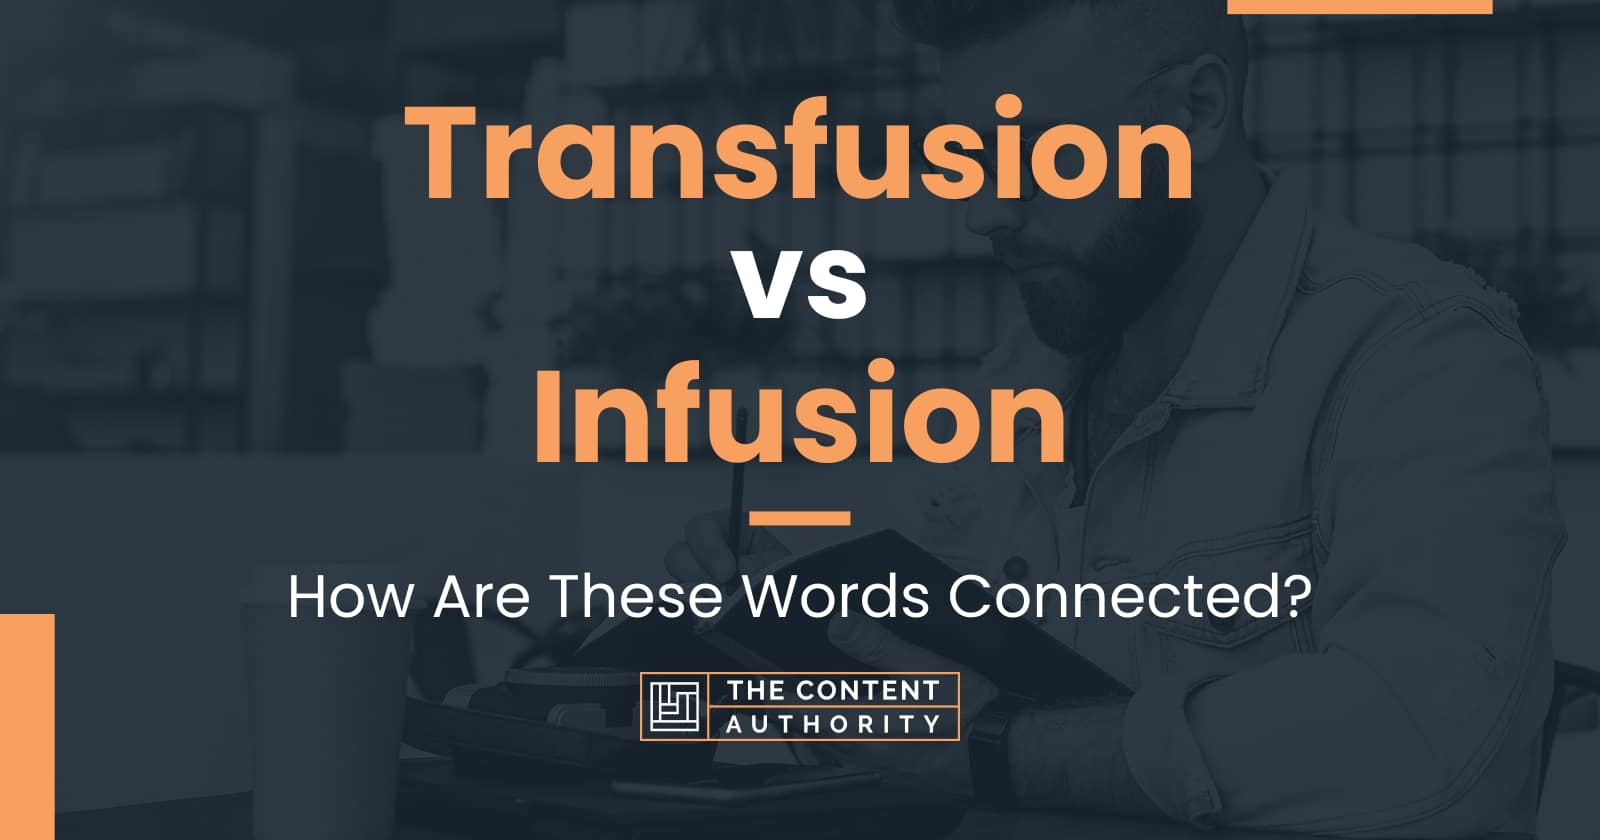 What is the Difference Between Infusion and Transfusion?